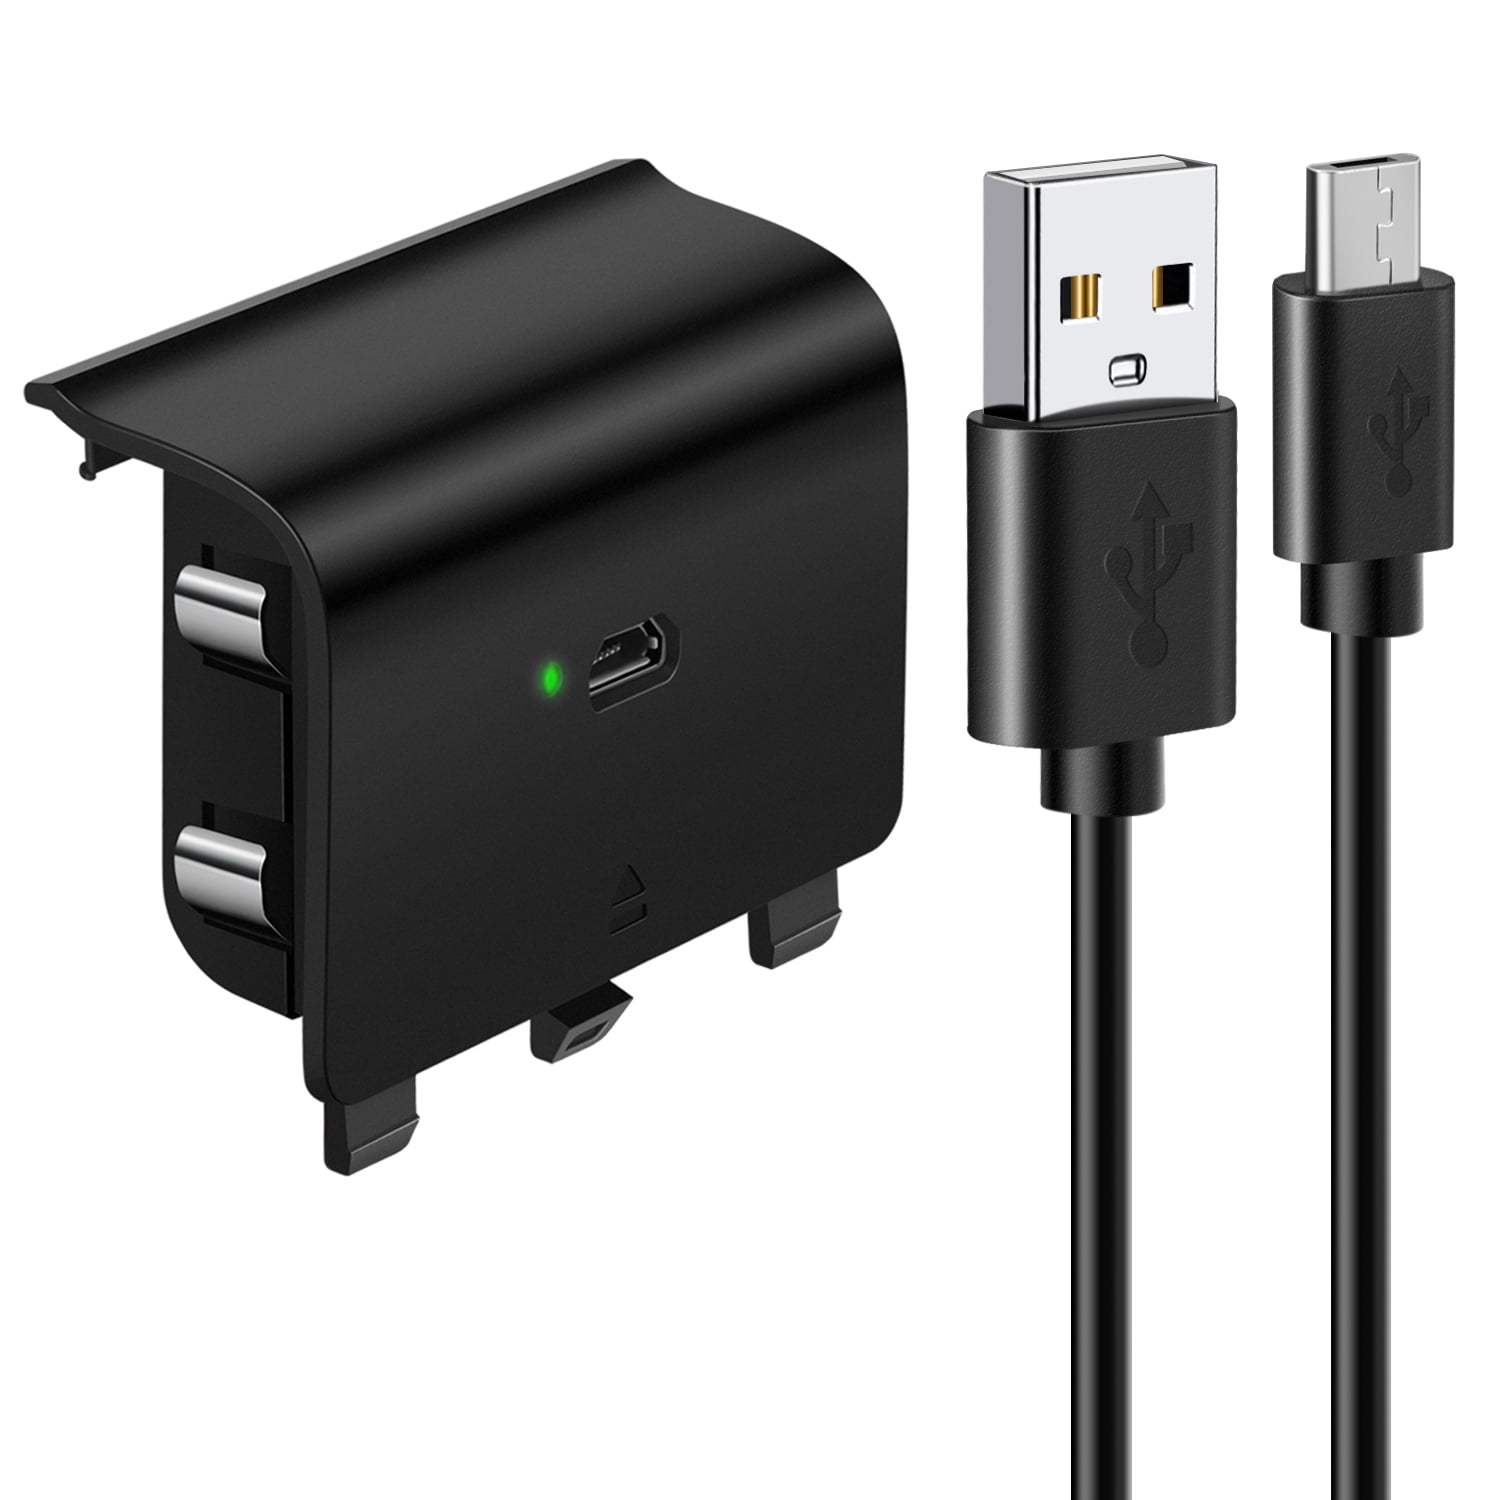 NEW Xbox One - Black Play And Charge Kit Adapter X2 (KMD) Charger + Battery